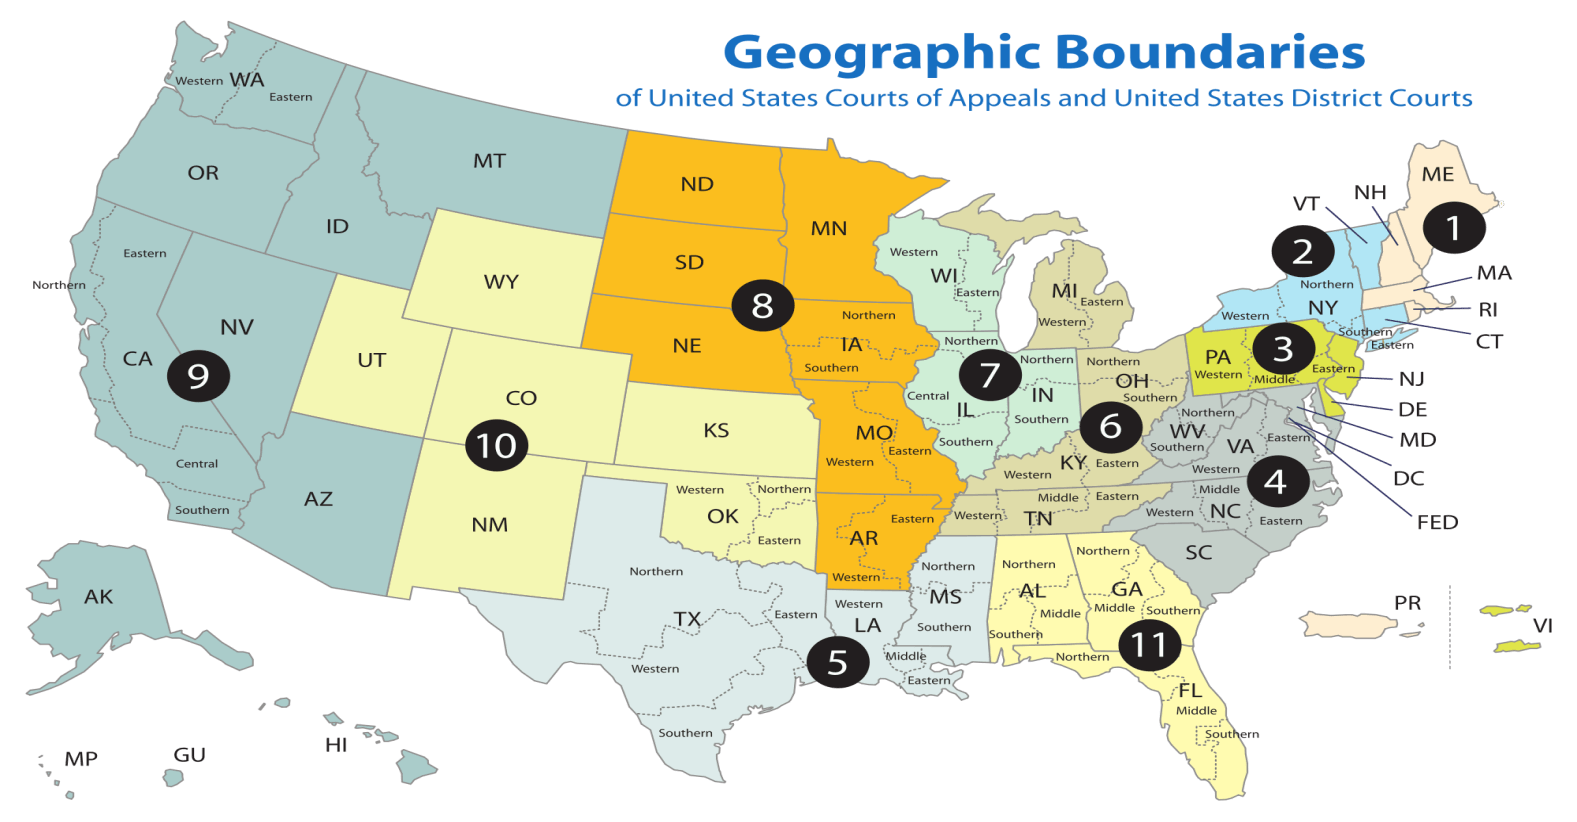 Geographic boundaries of the United States Courts